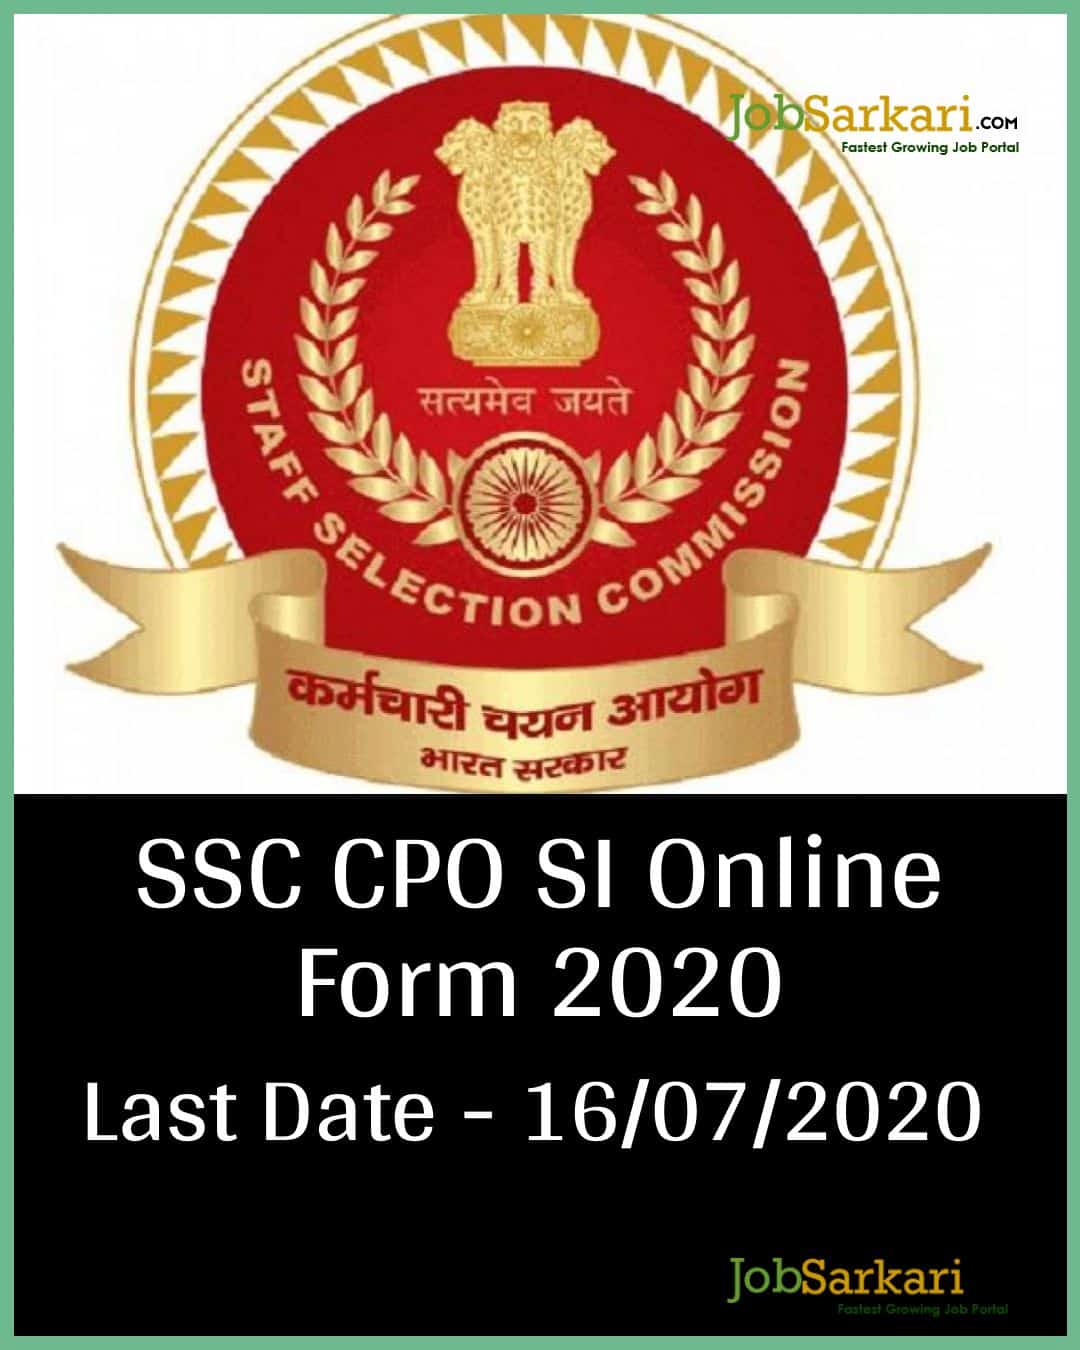 SSC CPO SI Online Form 2020